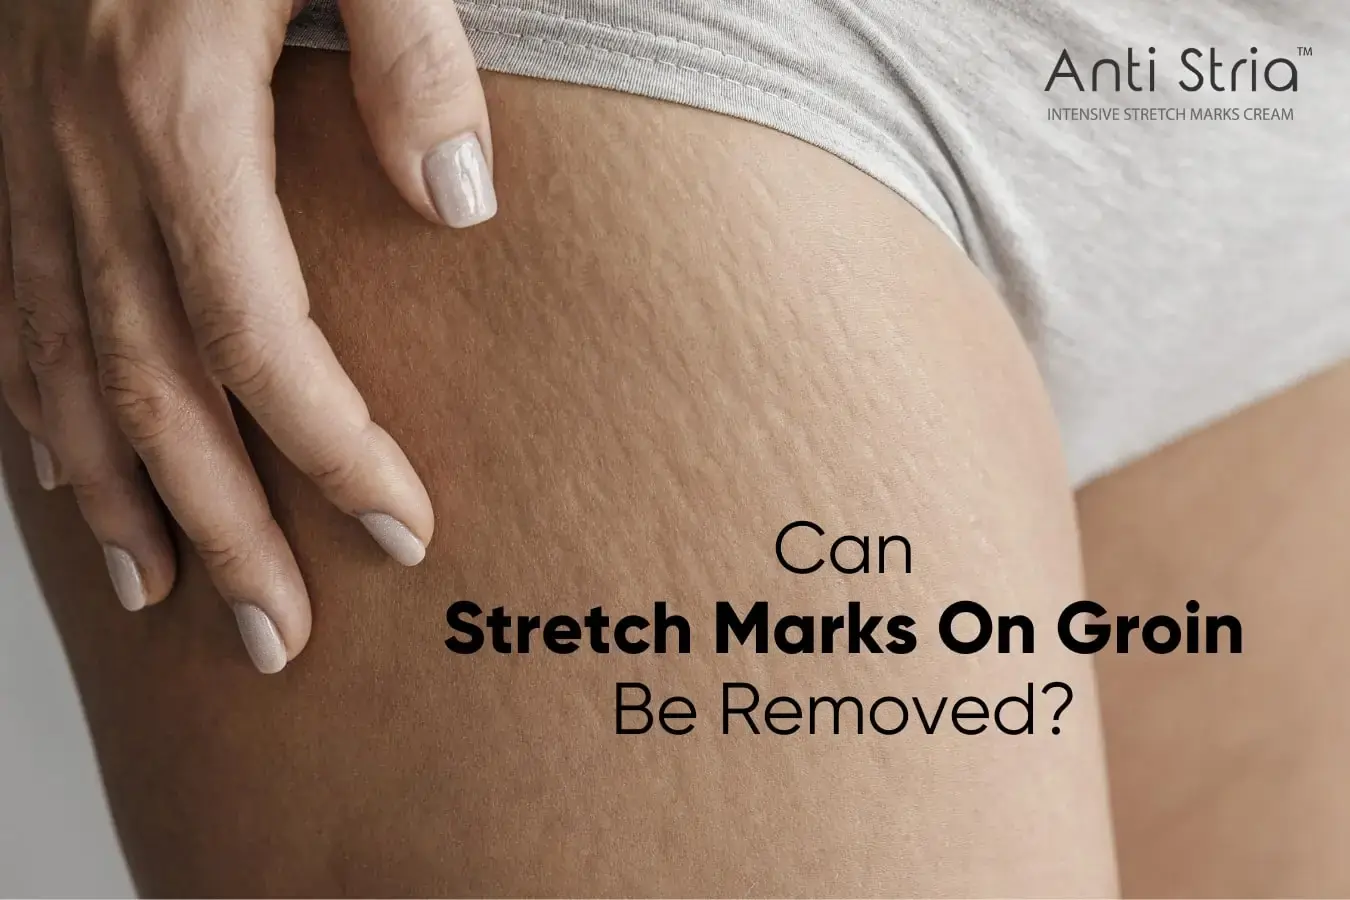 HOW TO REMOVE STRETCH MARKS APPEARING ON MY GROIN